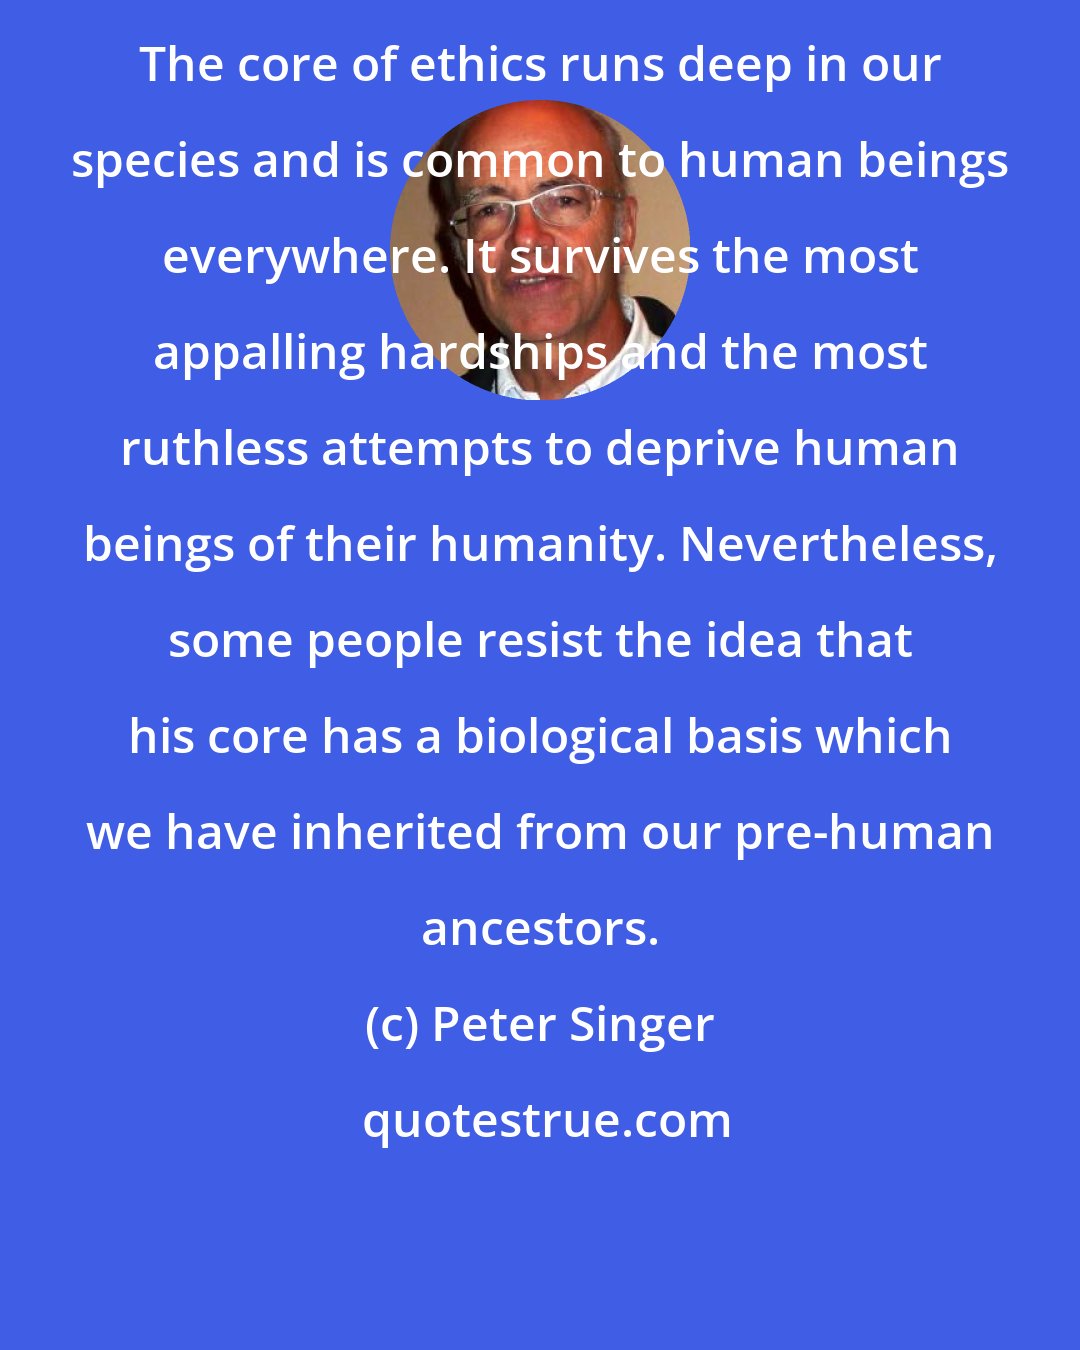 Peter Singer: The core of ethics runs deep in our species and is common to human beings everywhere. It survives the most appalling hardships and the most ruthless attempts to deprive human beings of their humanity. Nevertheless, some people resist the idea that his core has a biological basis which we have inherited from our pre-human ancestors.